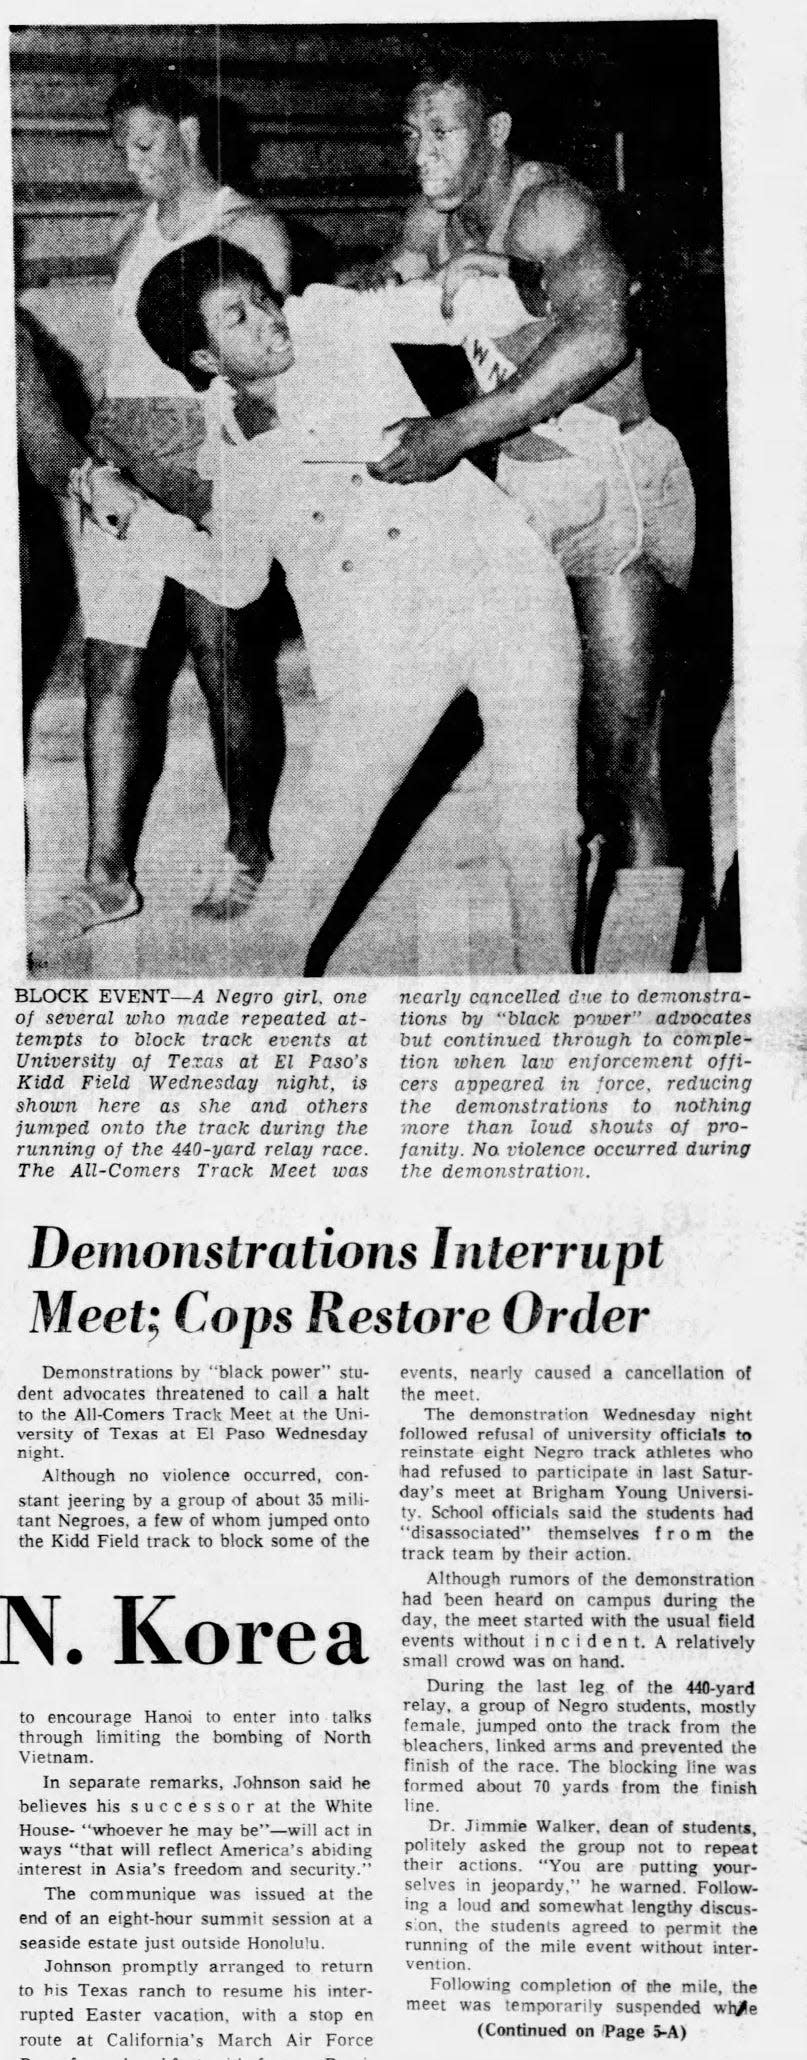 April 18, 1968: Demonstrations by Black Power students advocates threatened to call a halt to the All-Comers Track Meet at the University of Texas at El Paso.